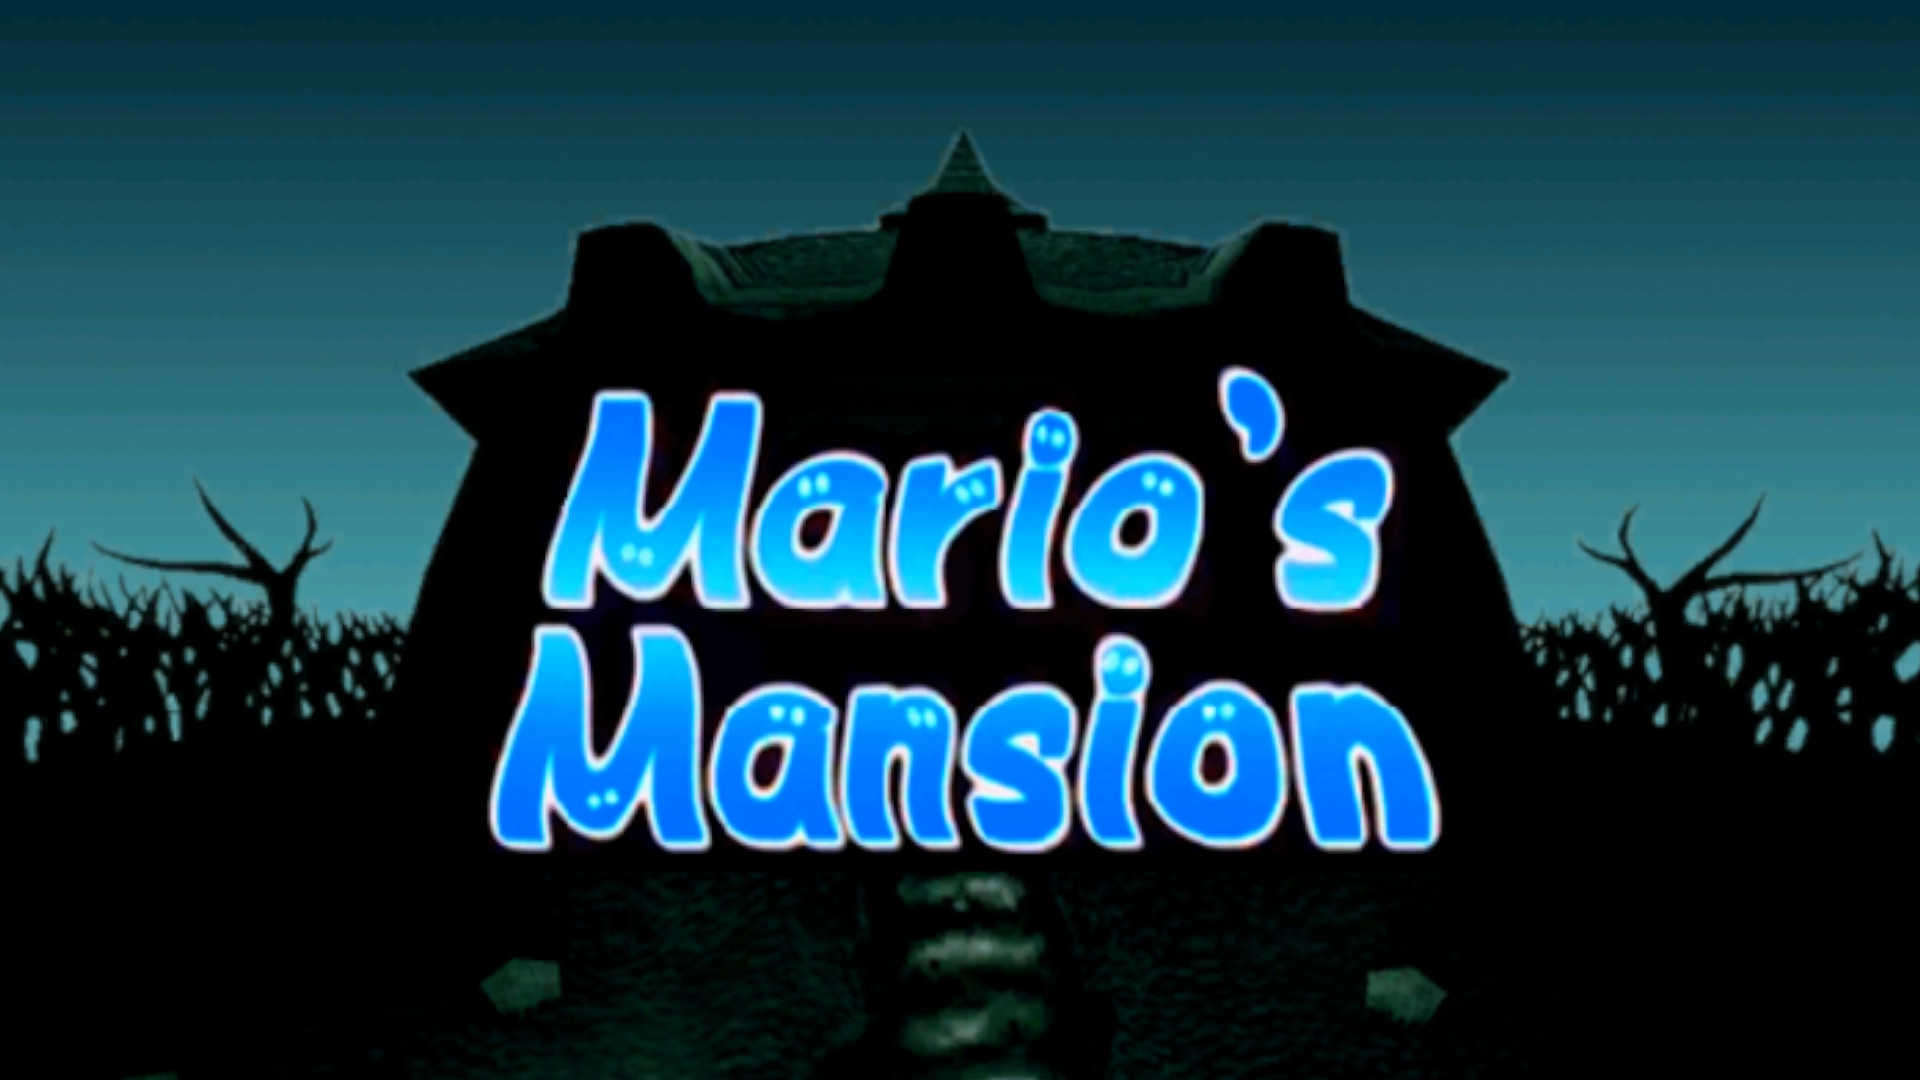 Luigi's Mansion Project Reality ROM hack in development : r/Gamecube